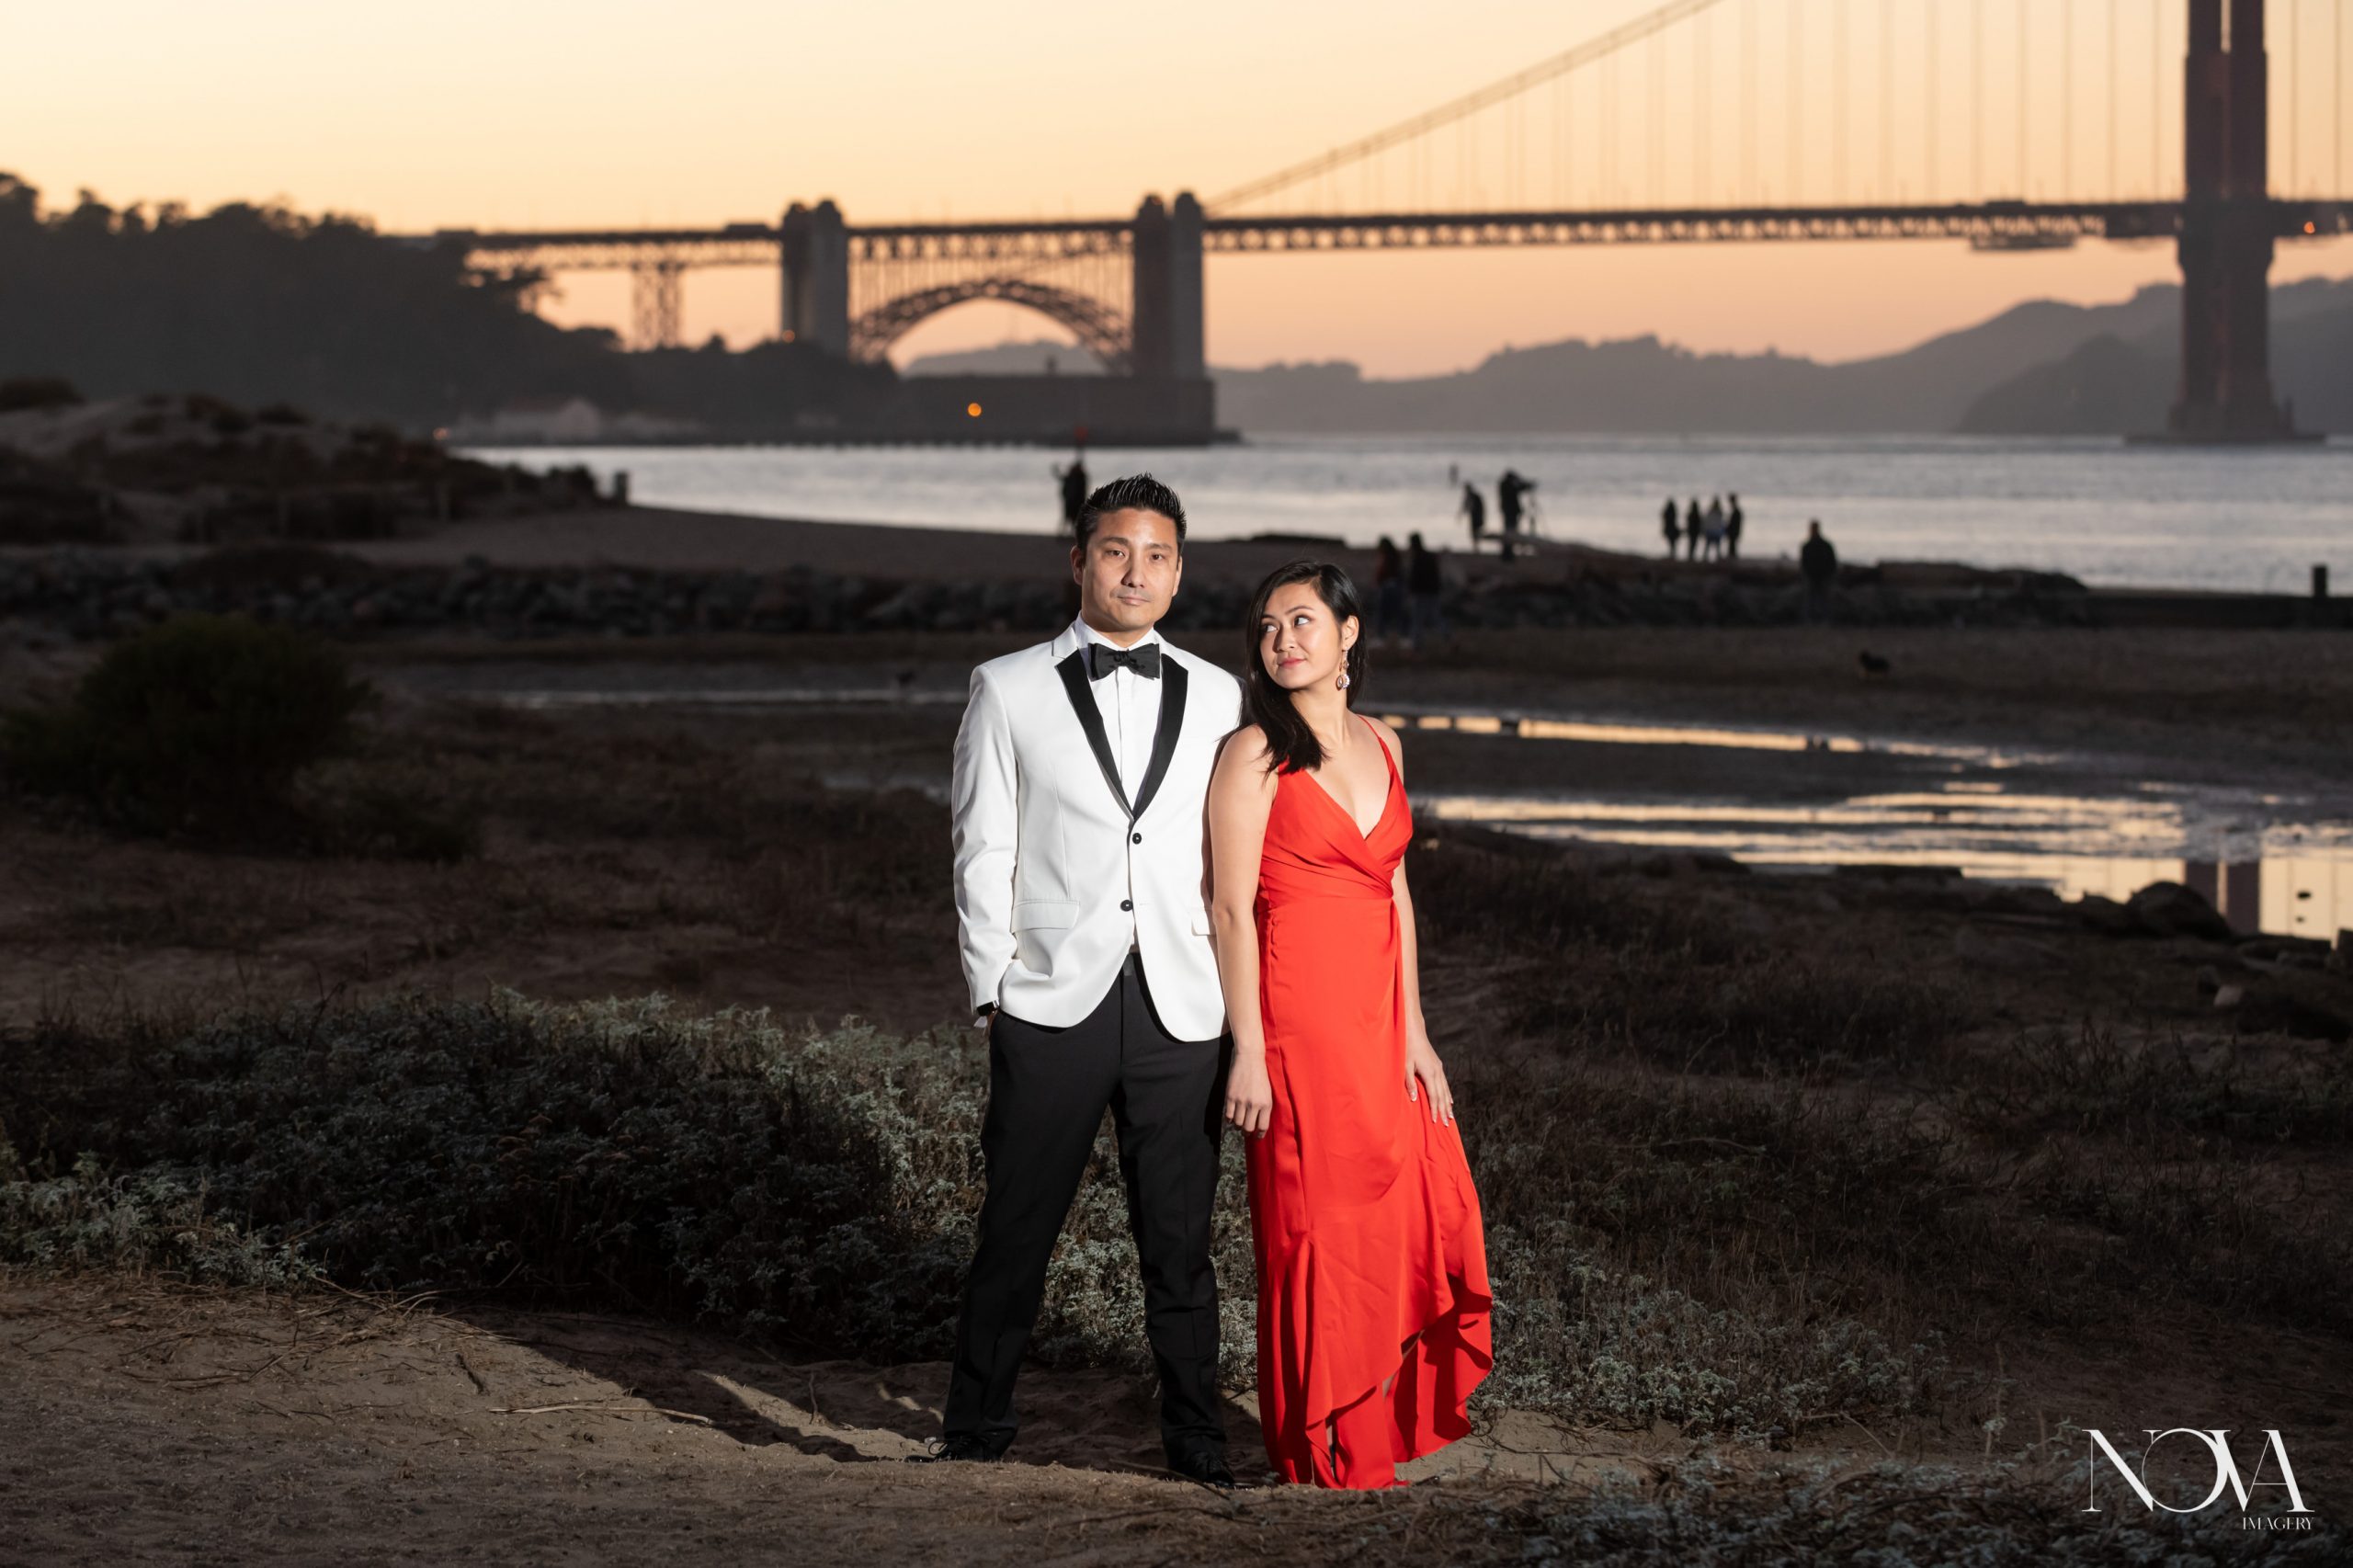 Editorial styled engagement session in San Francisco during sunset.